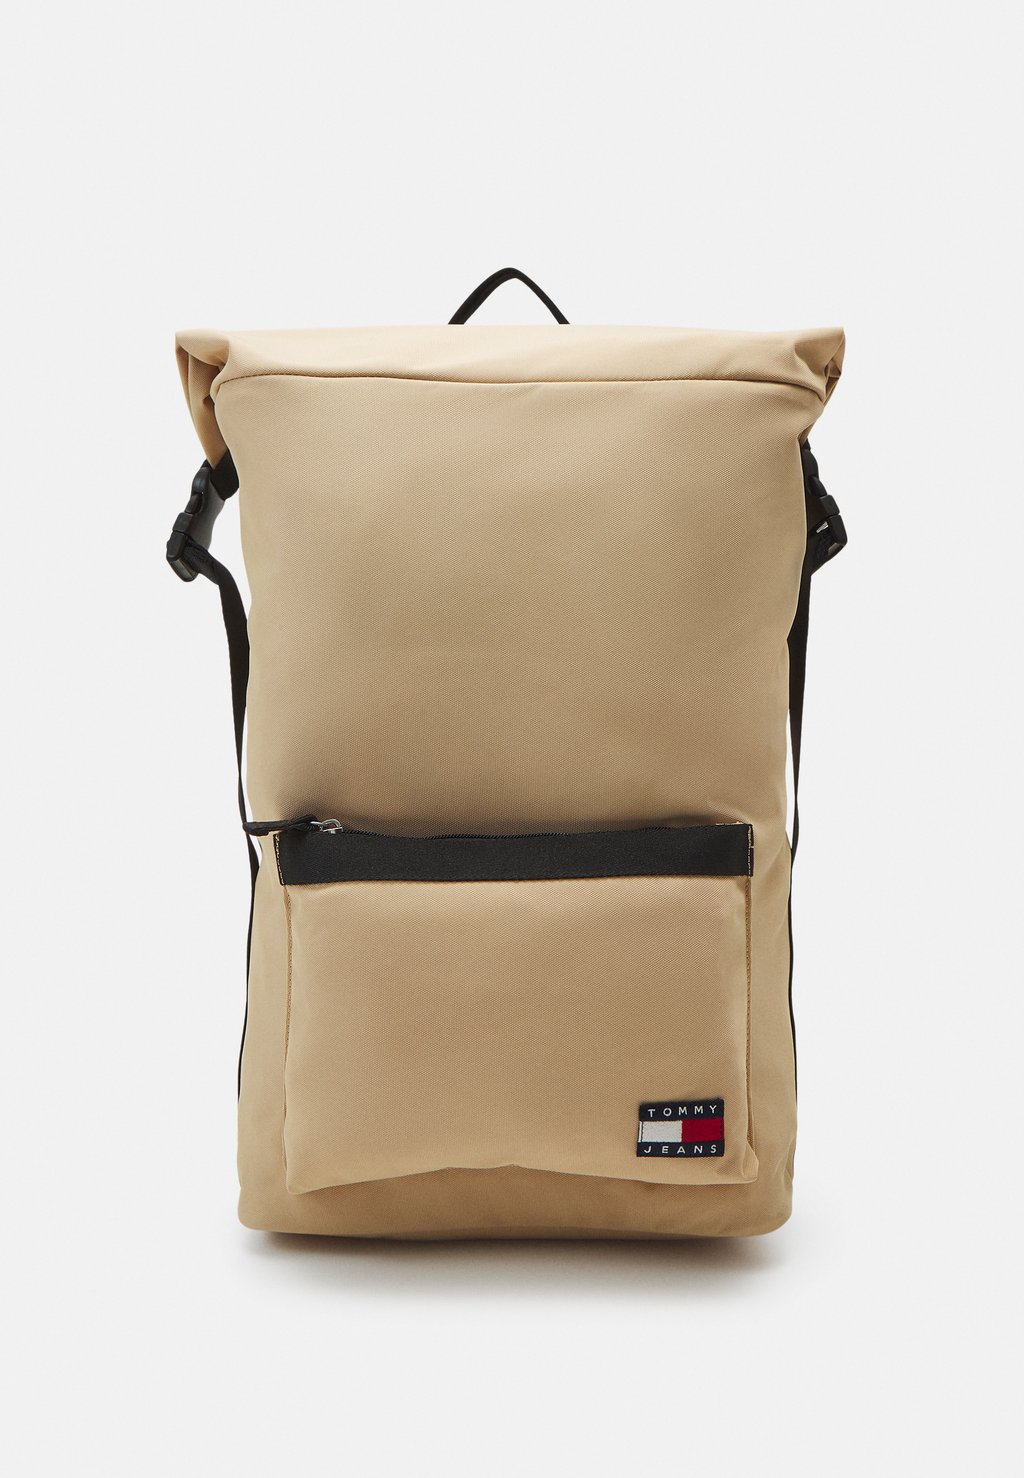 Рюкзак DAILY ROLLTOP UNISEX Tommy Jeans, цвет tawny sand